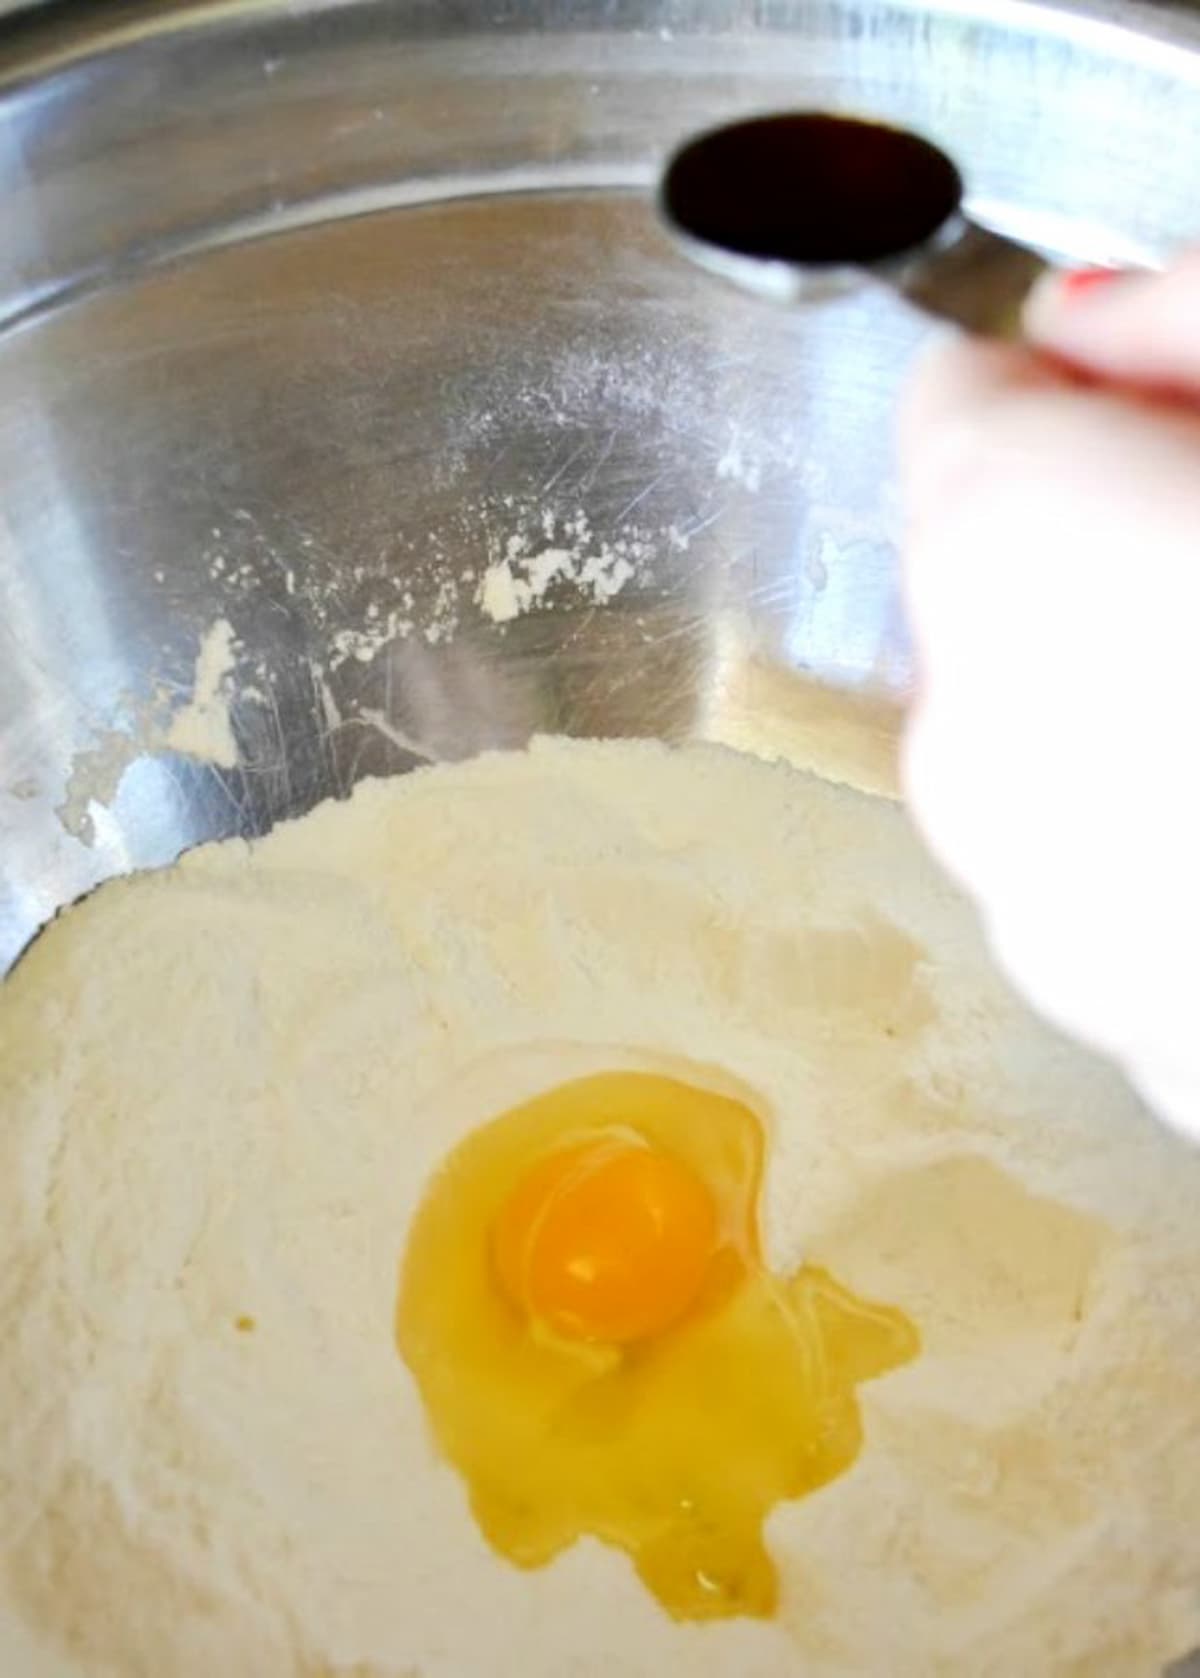 Flour, Sugar and Baking Powder mixed together in a mixing bowl with an egg in the center and a teaspoon of Vanilla being held over the top of bowl.